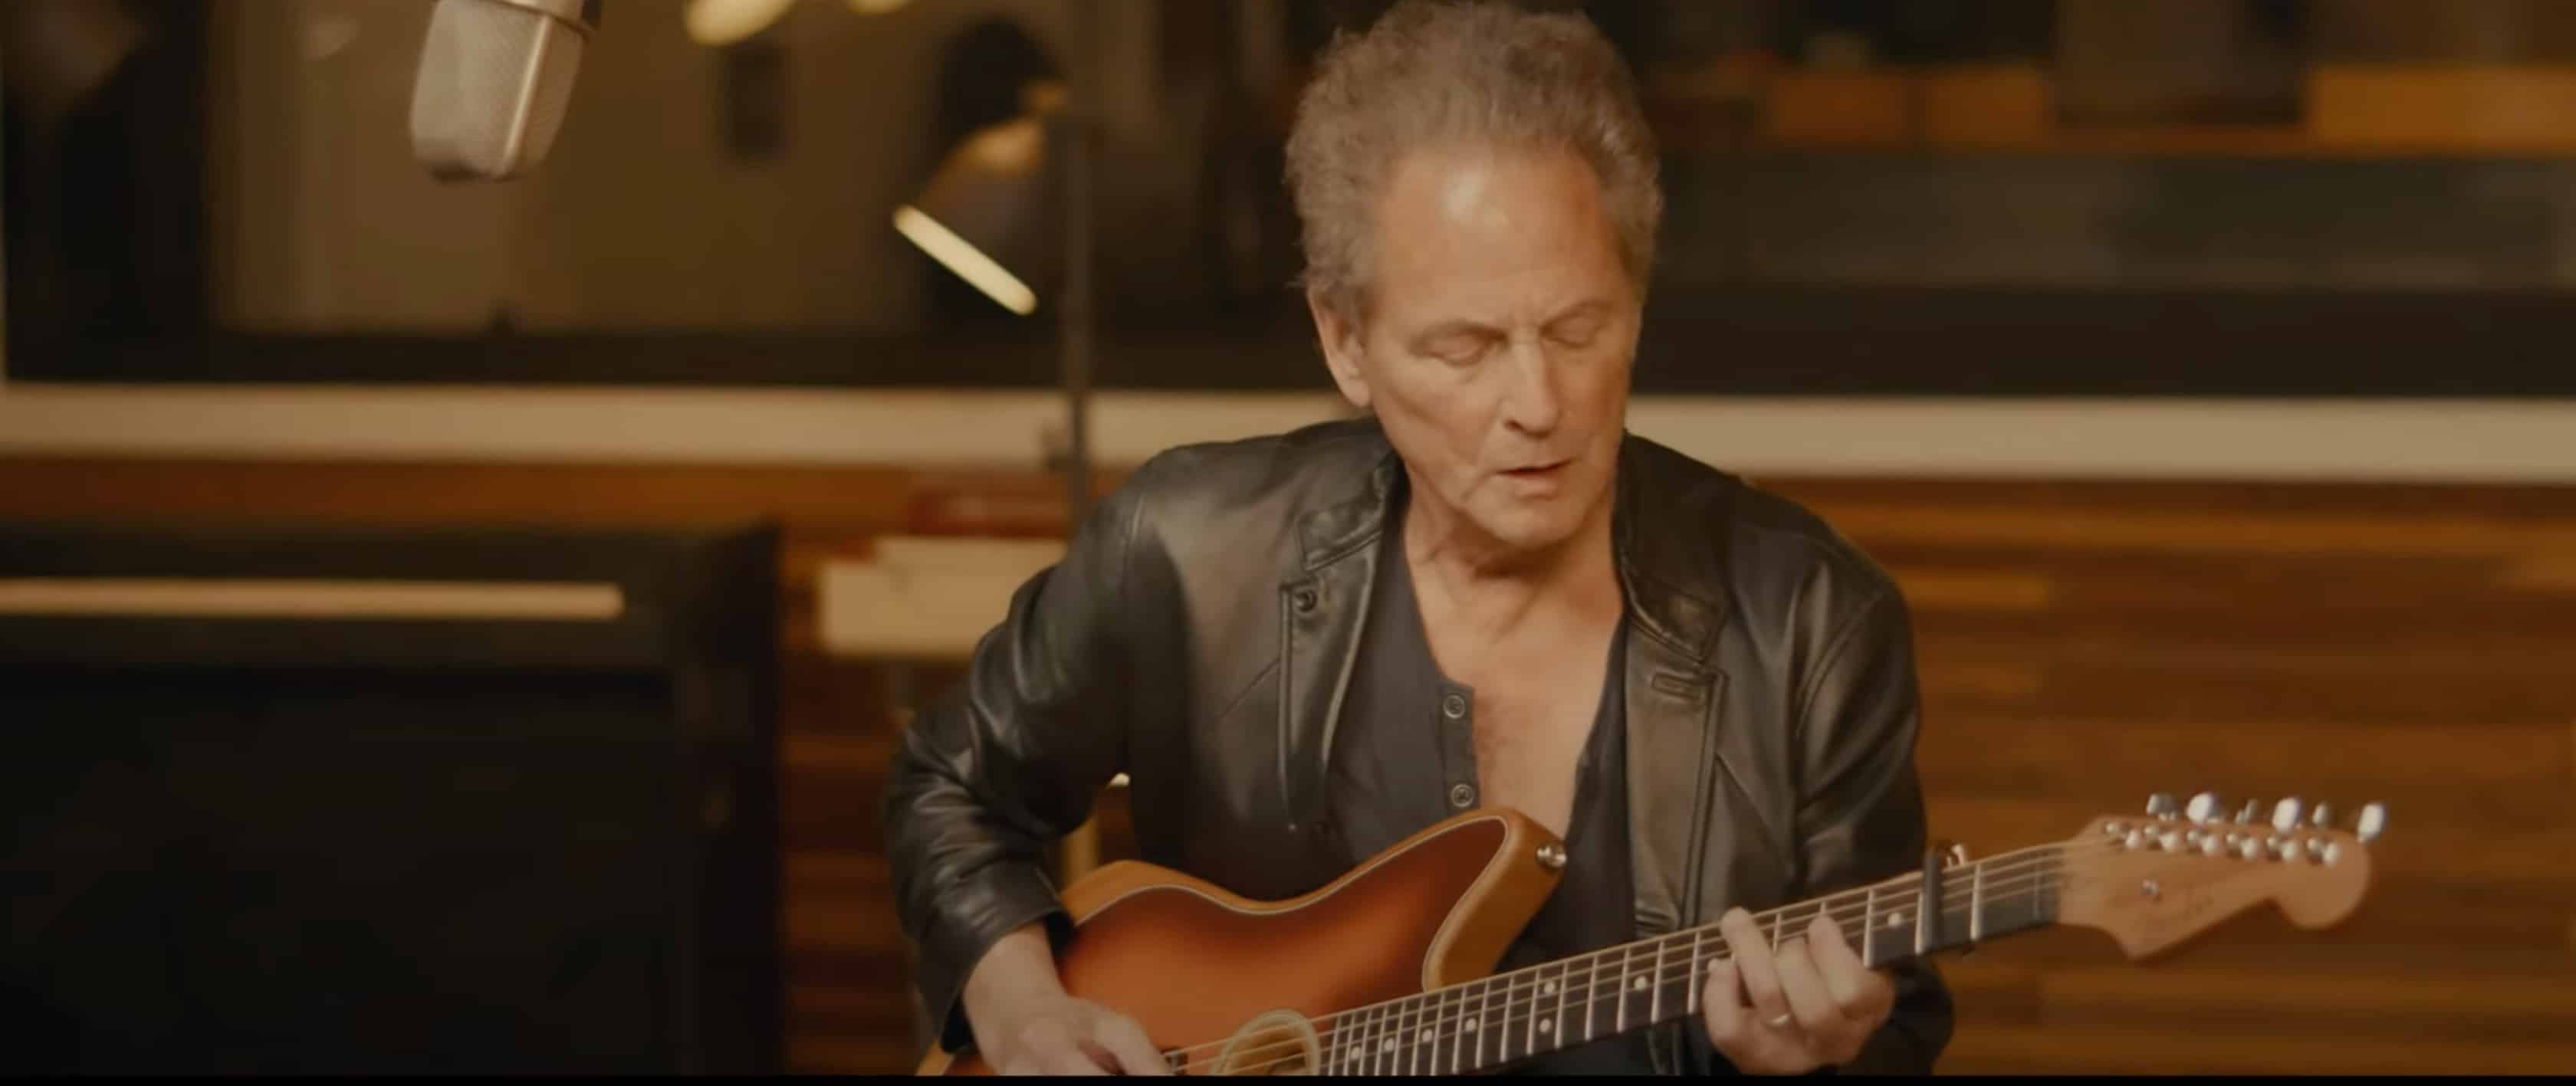 Watch Lindsey Buckingham Perform New Version of “Never Going Back Again” In Fender’s New Re-Creation Series